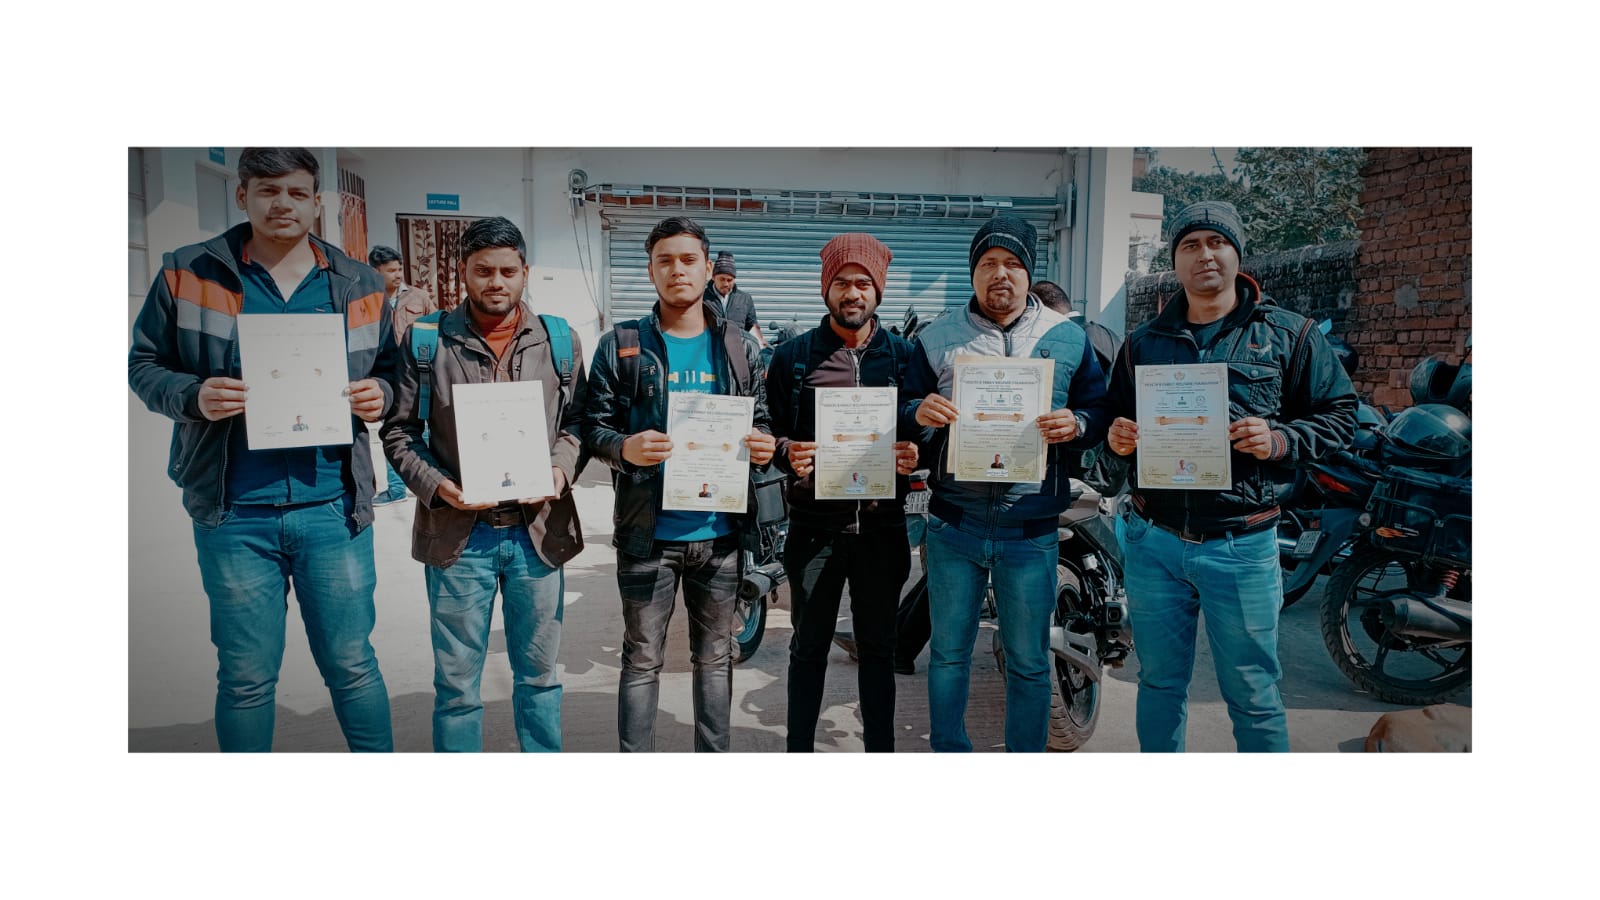 Candidates with CERTIFICATE